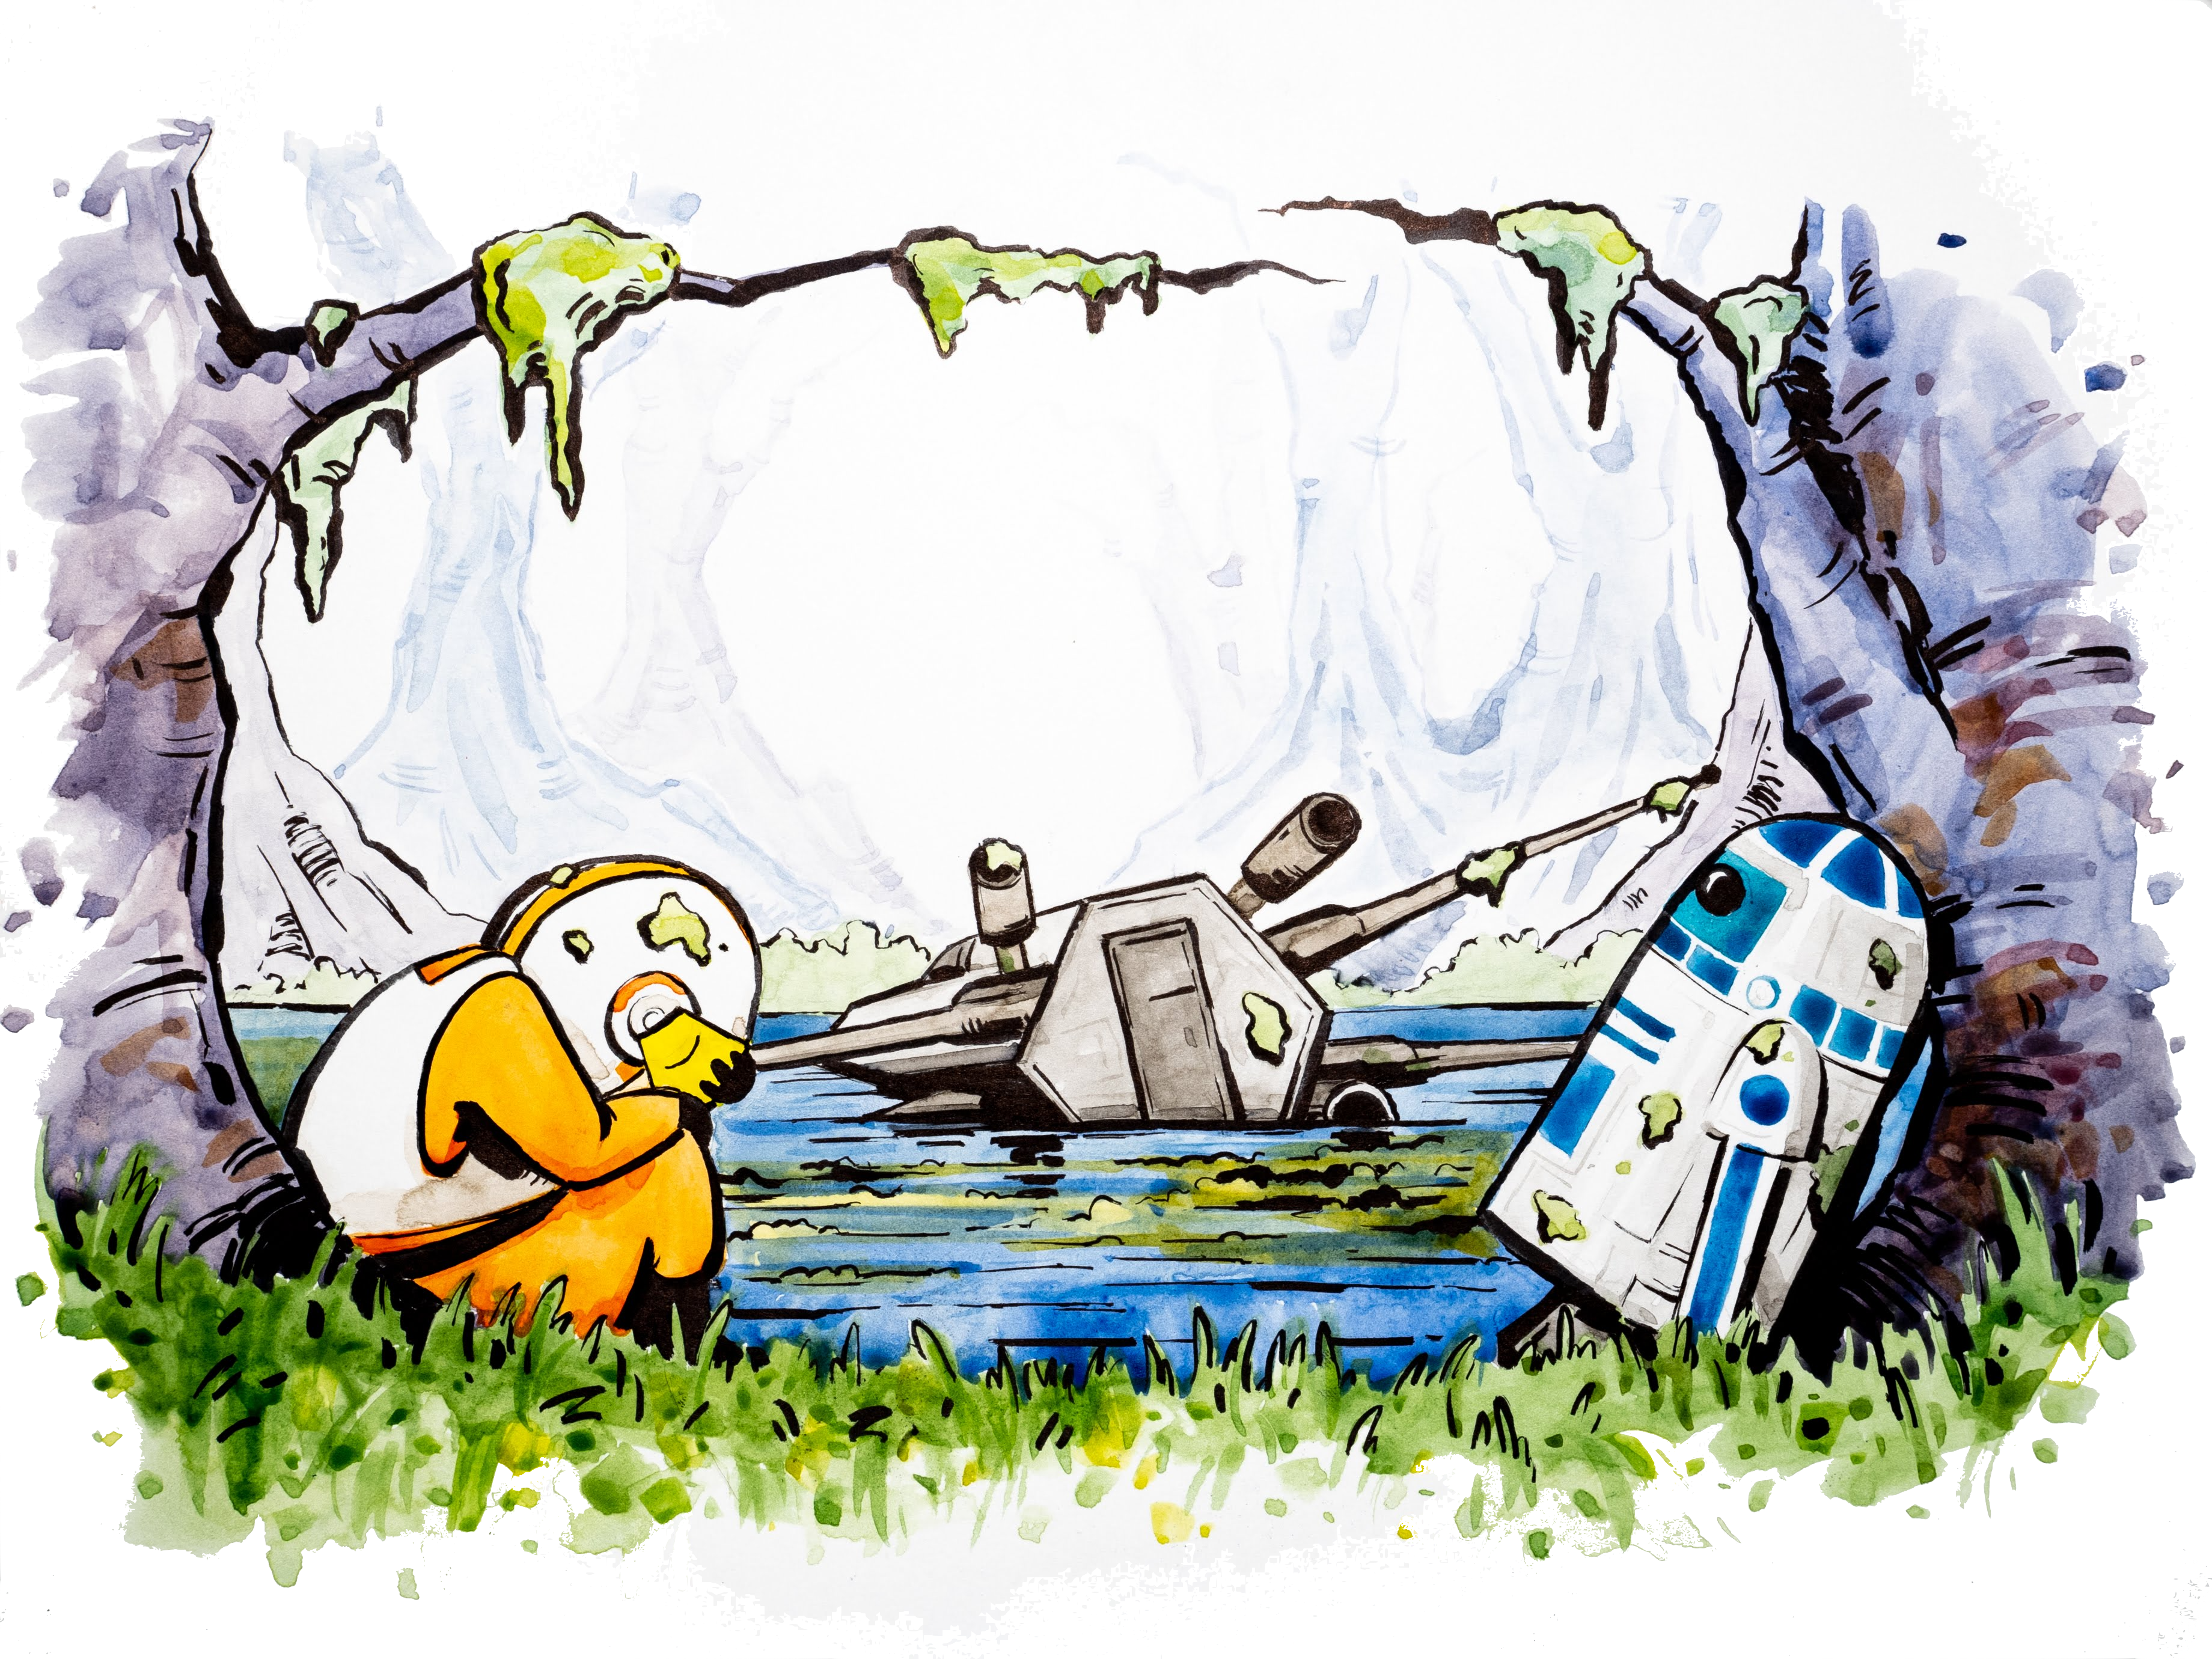 In the foreground, Luke sits on the bank of a bog with his head hanging in his lap. R2D2 leans up agains a tree. In the background, an X-wing is half submerged in the bog.